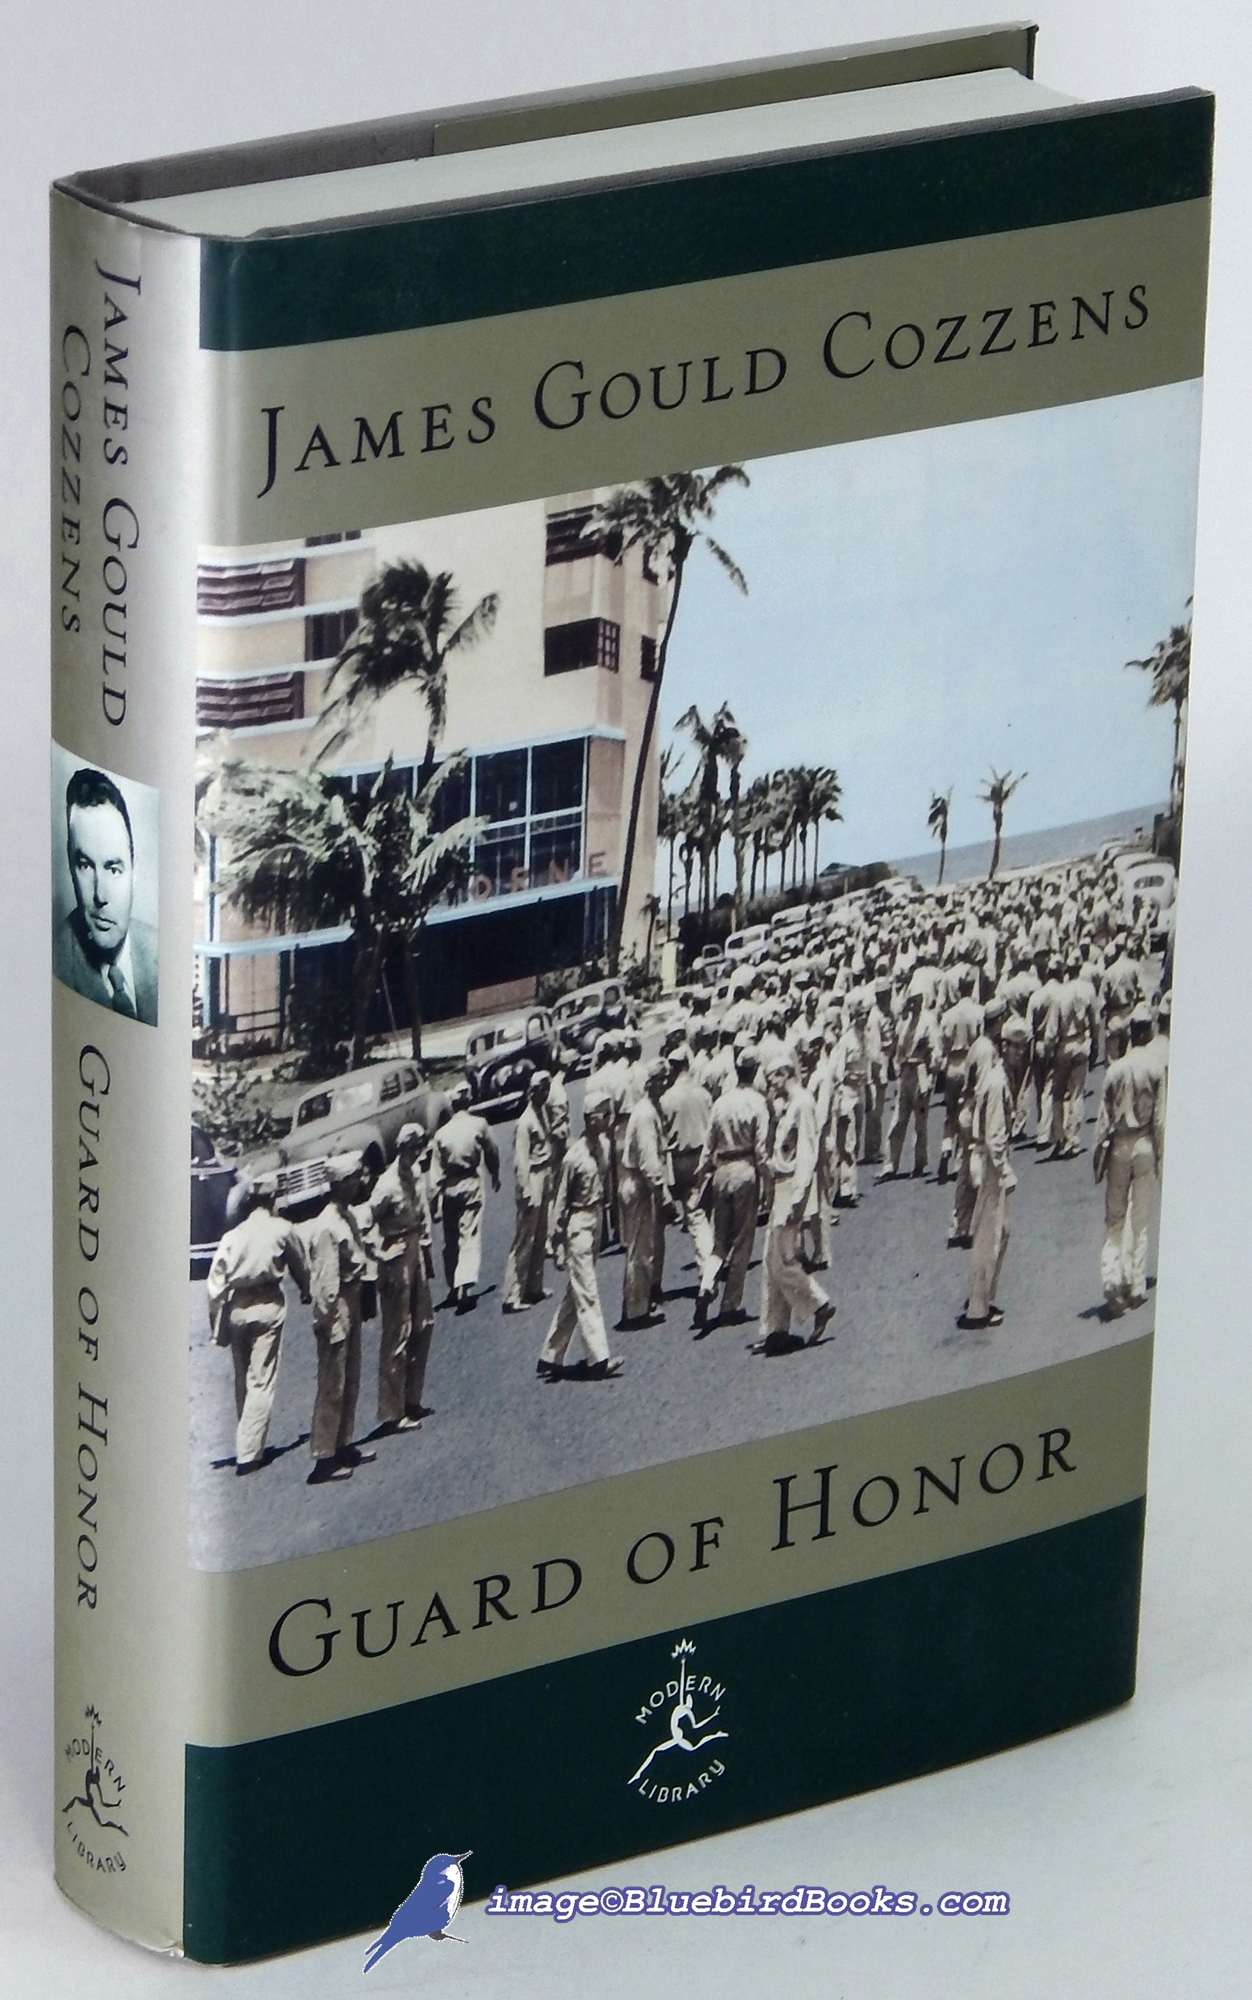 COZZENS, JAMES GOULD - Guard of Honor (Modern Library Giant)